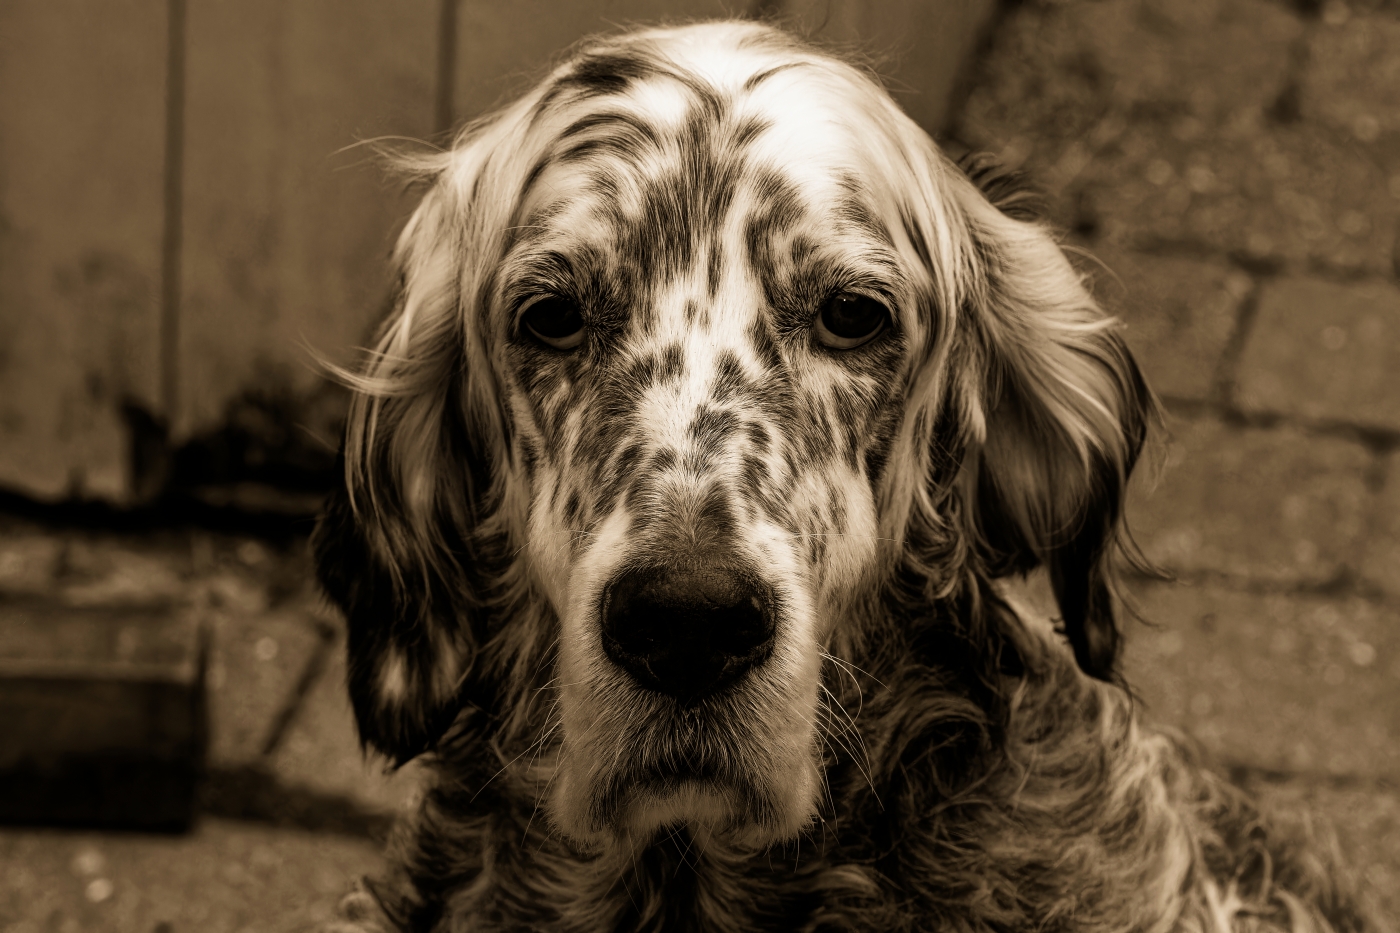 photographer dntphotographs portraiture  photo. photograph of sapphire one of my english setters in black  white.